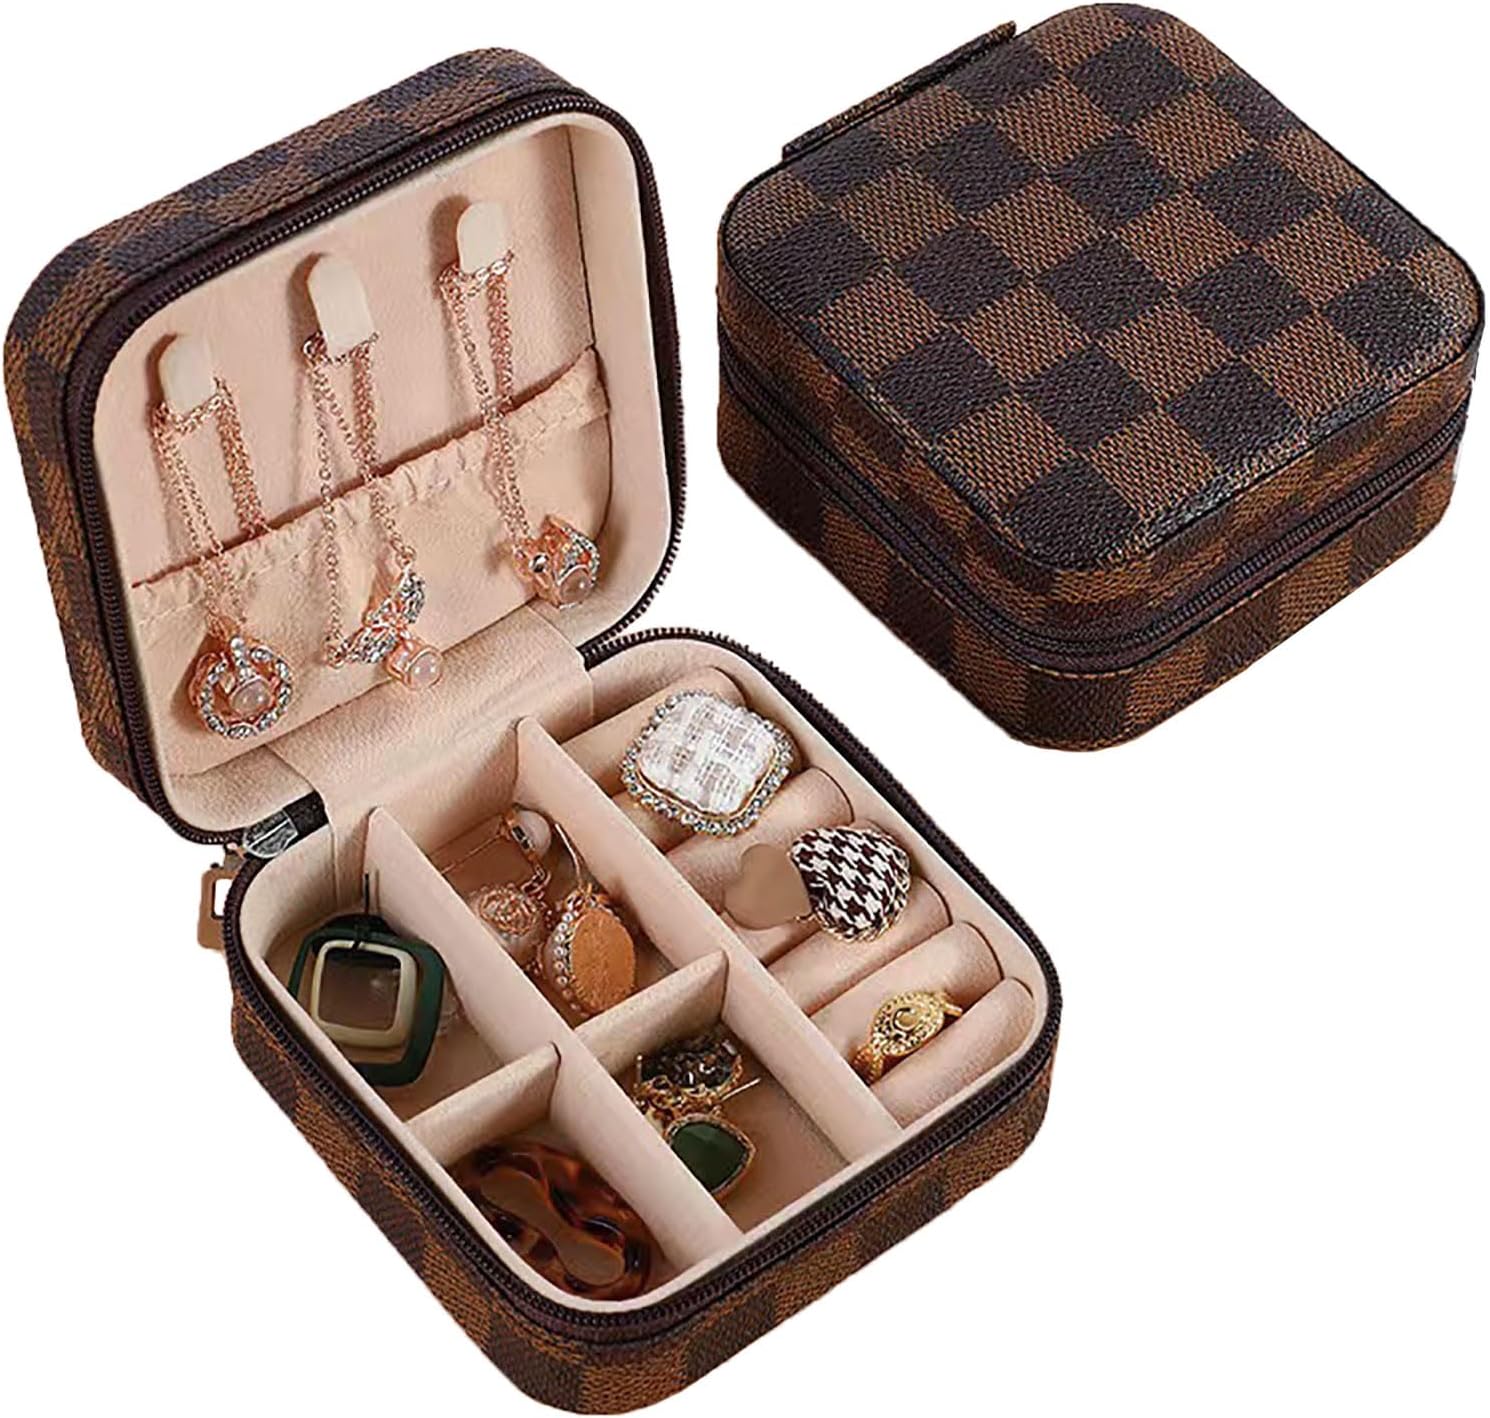 Portable Earrings Necklace Jewelry Box Wholesale Pu Leather Portable Small Jewelry Case